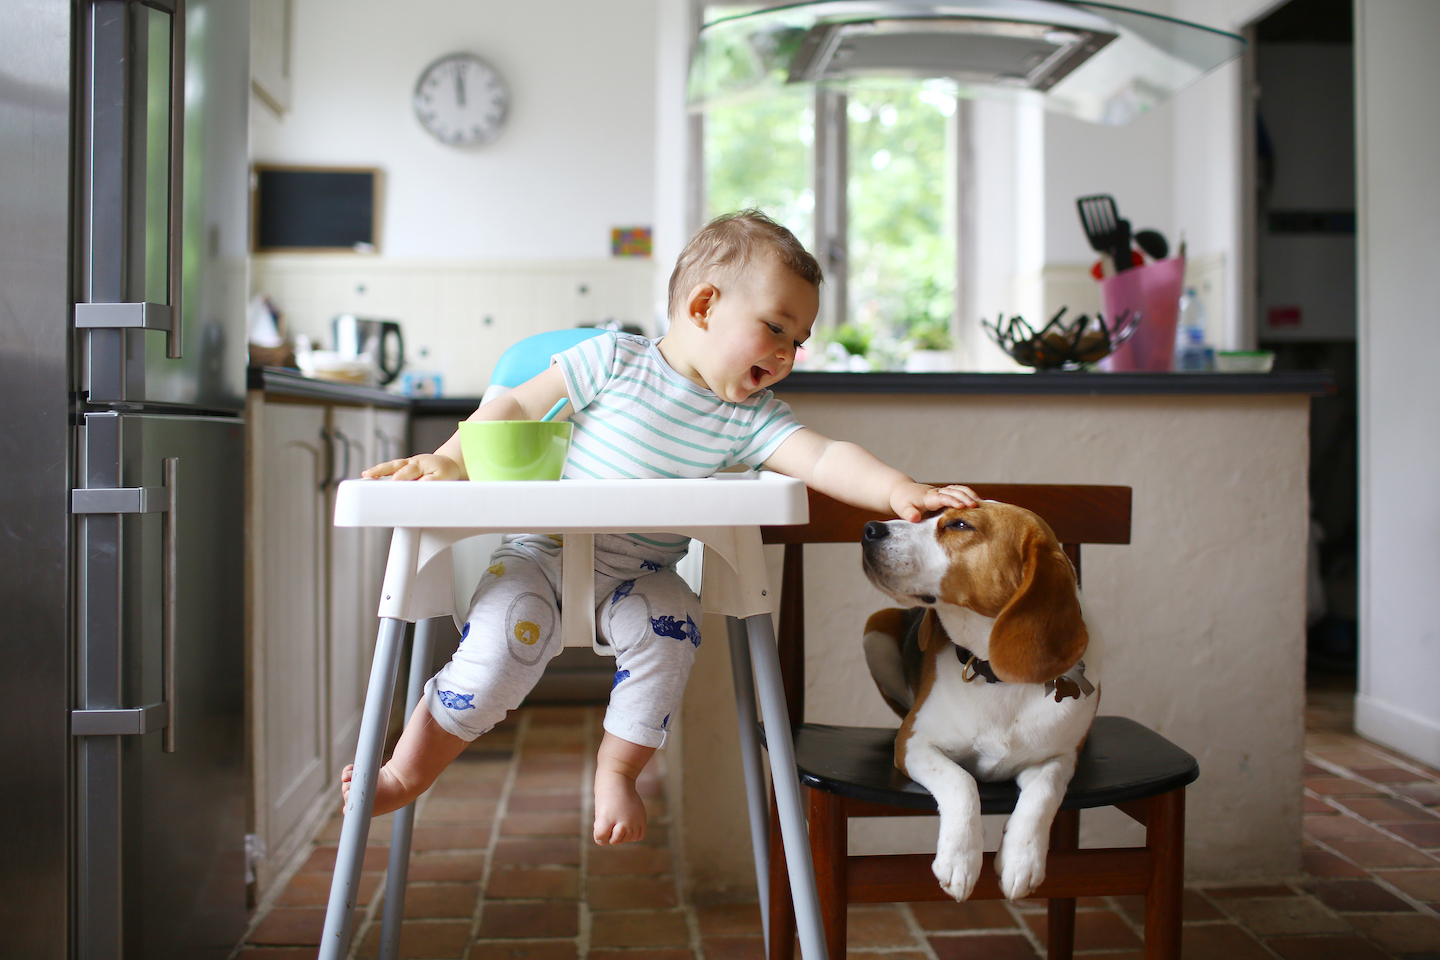 a smiling baby reaches down from a high chair to pet the nose of a brown and white dog